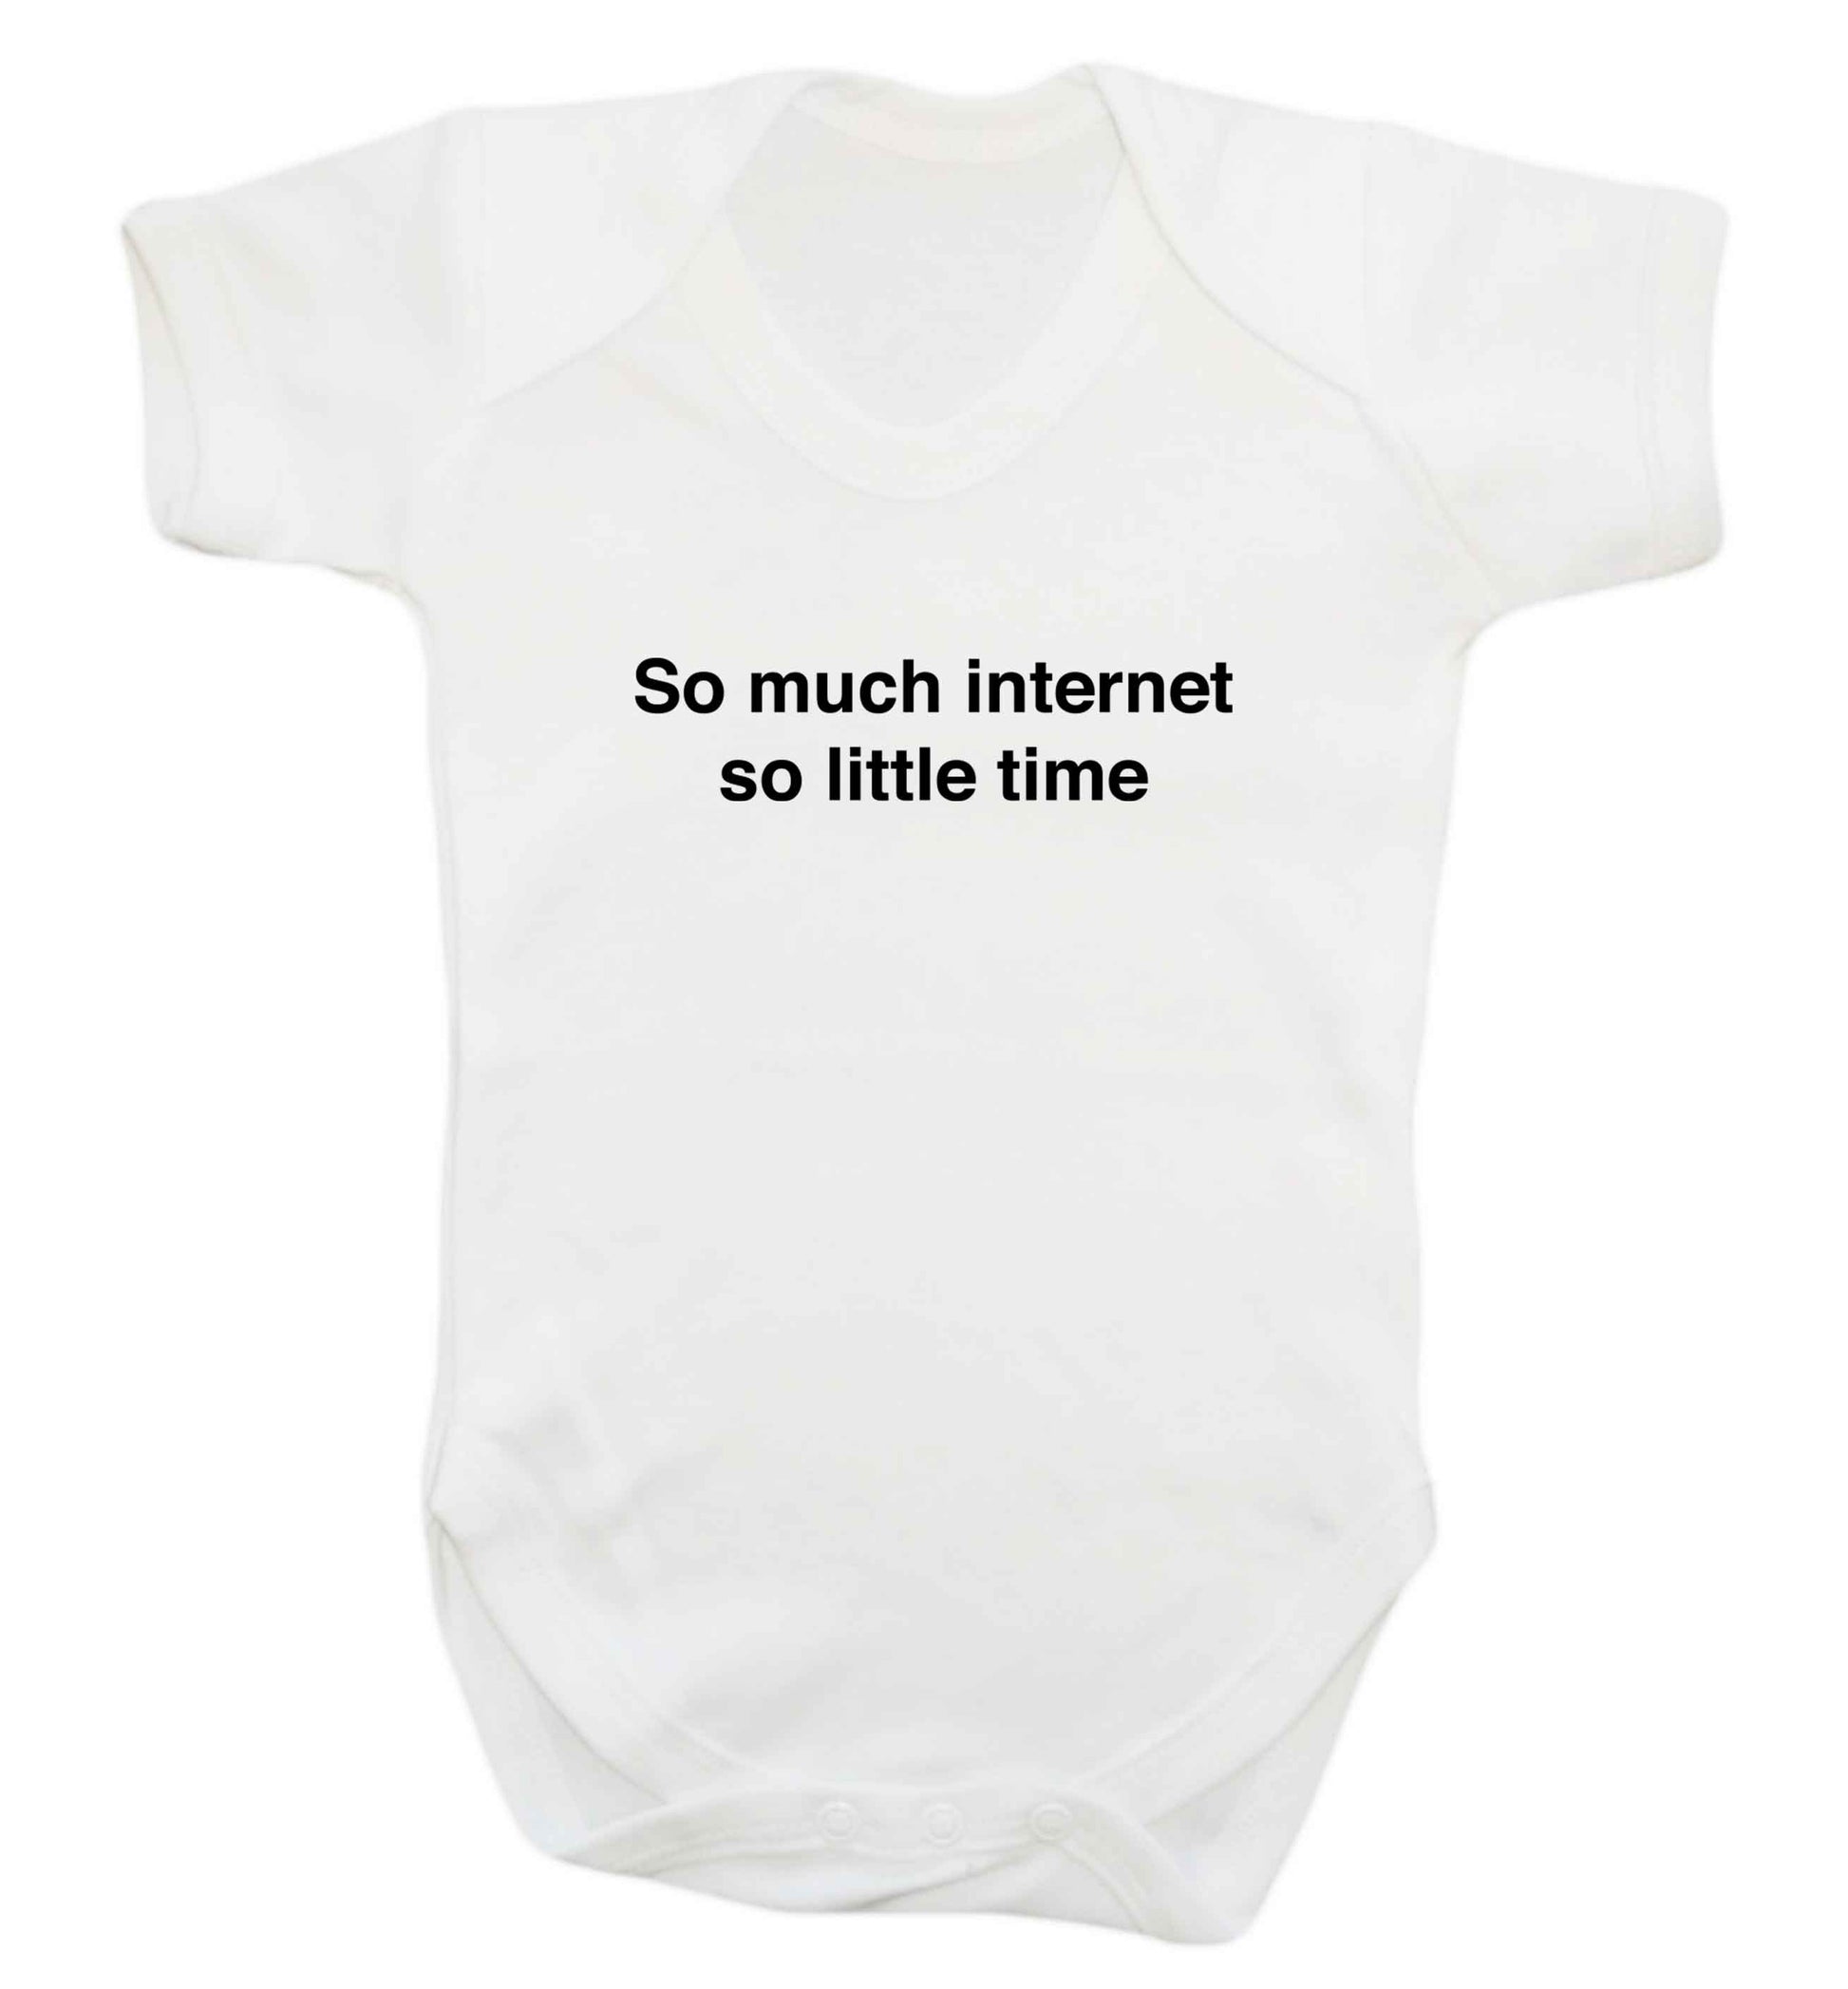 So much internet so little time baby vest white 18-24 months